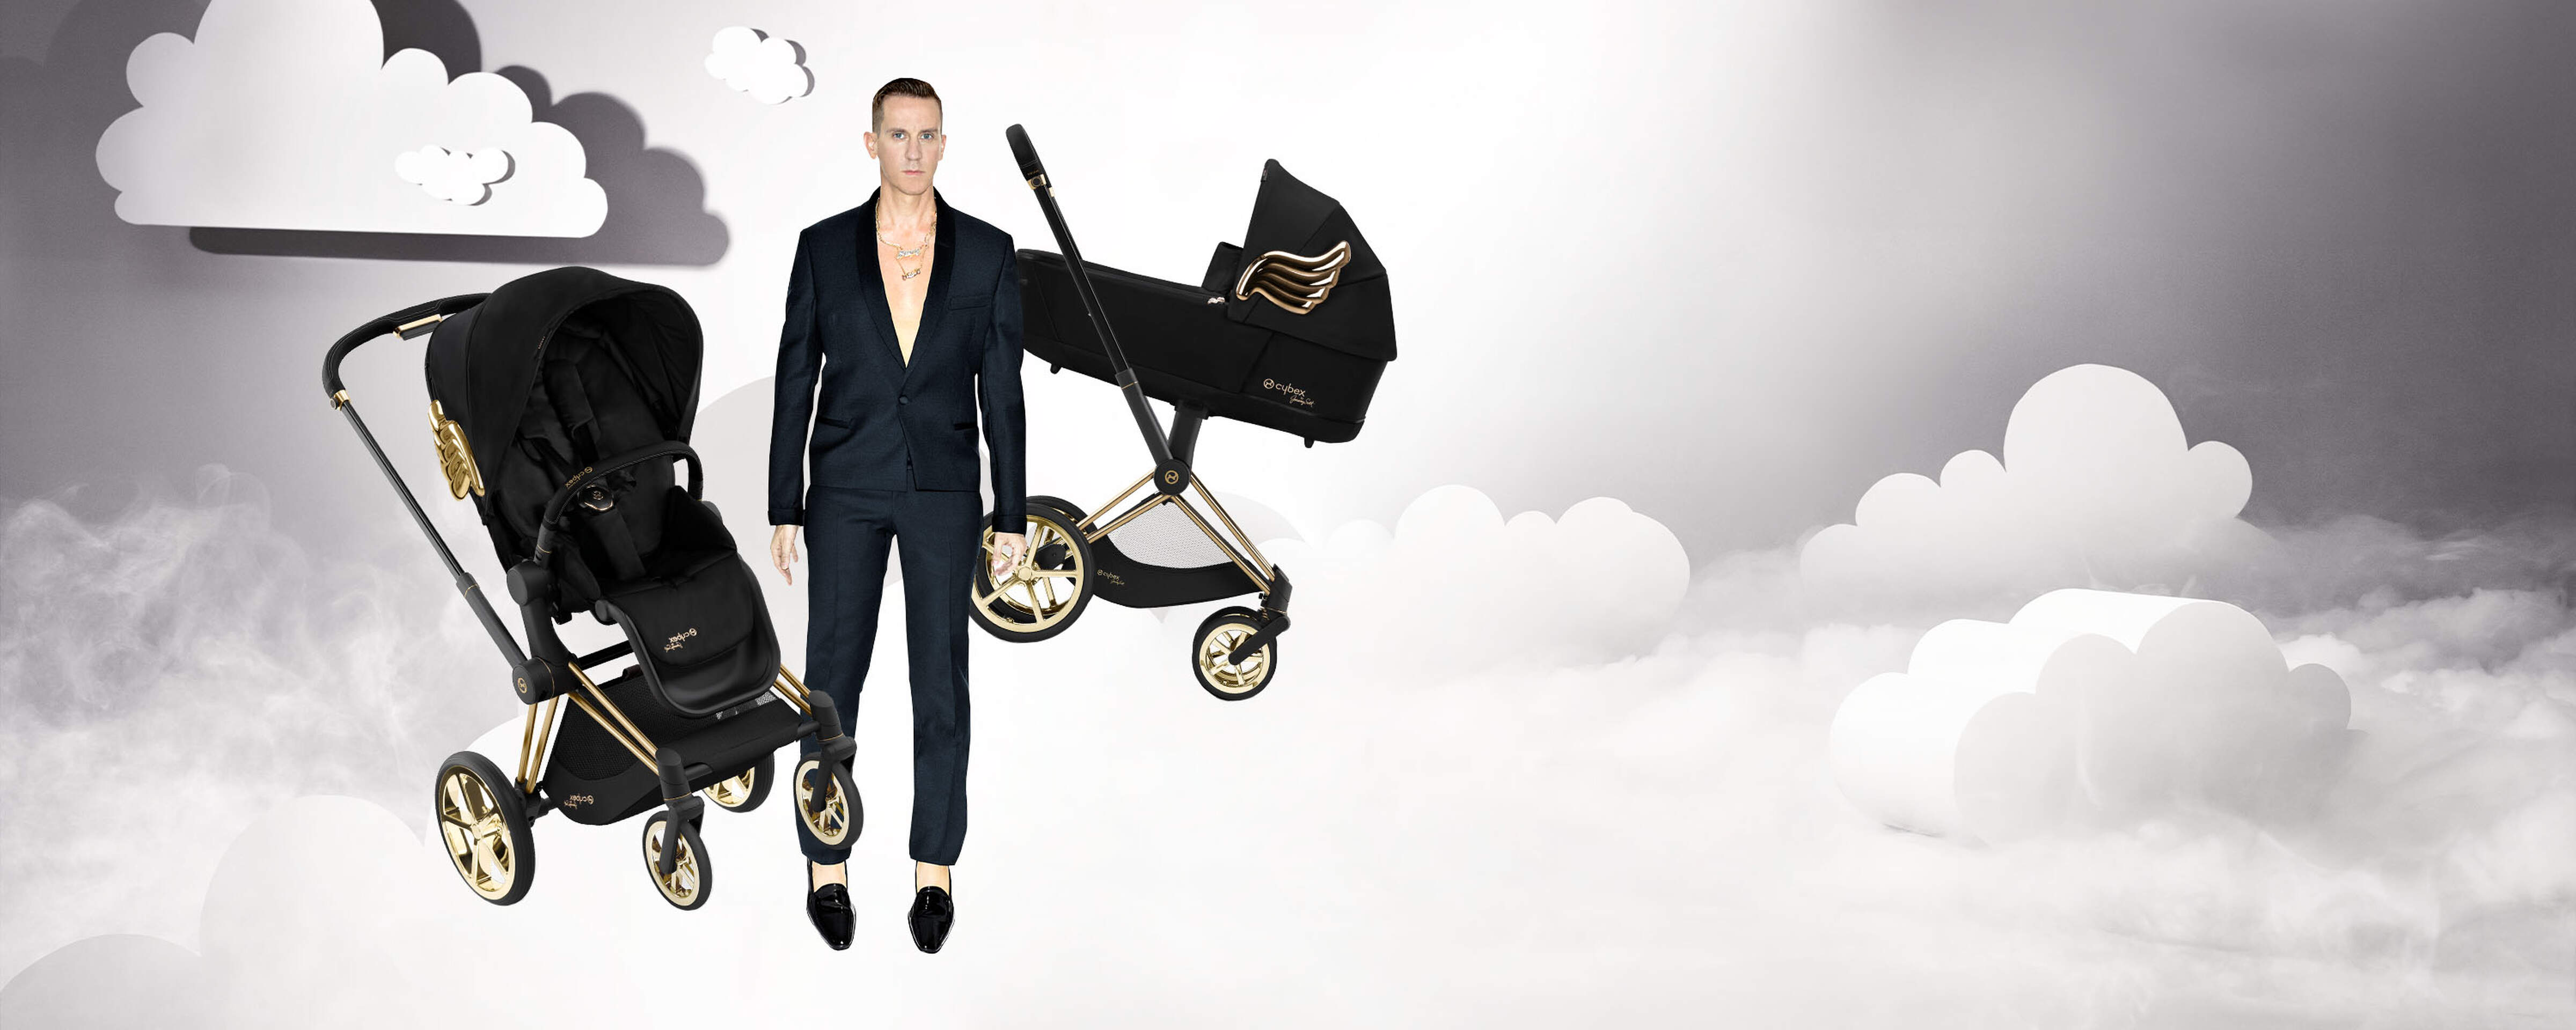 Cybex by Jeremy Scott Wings Collection Banner Image